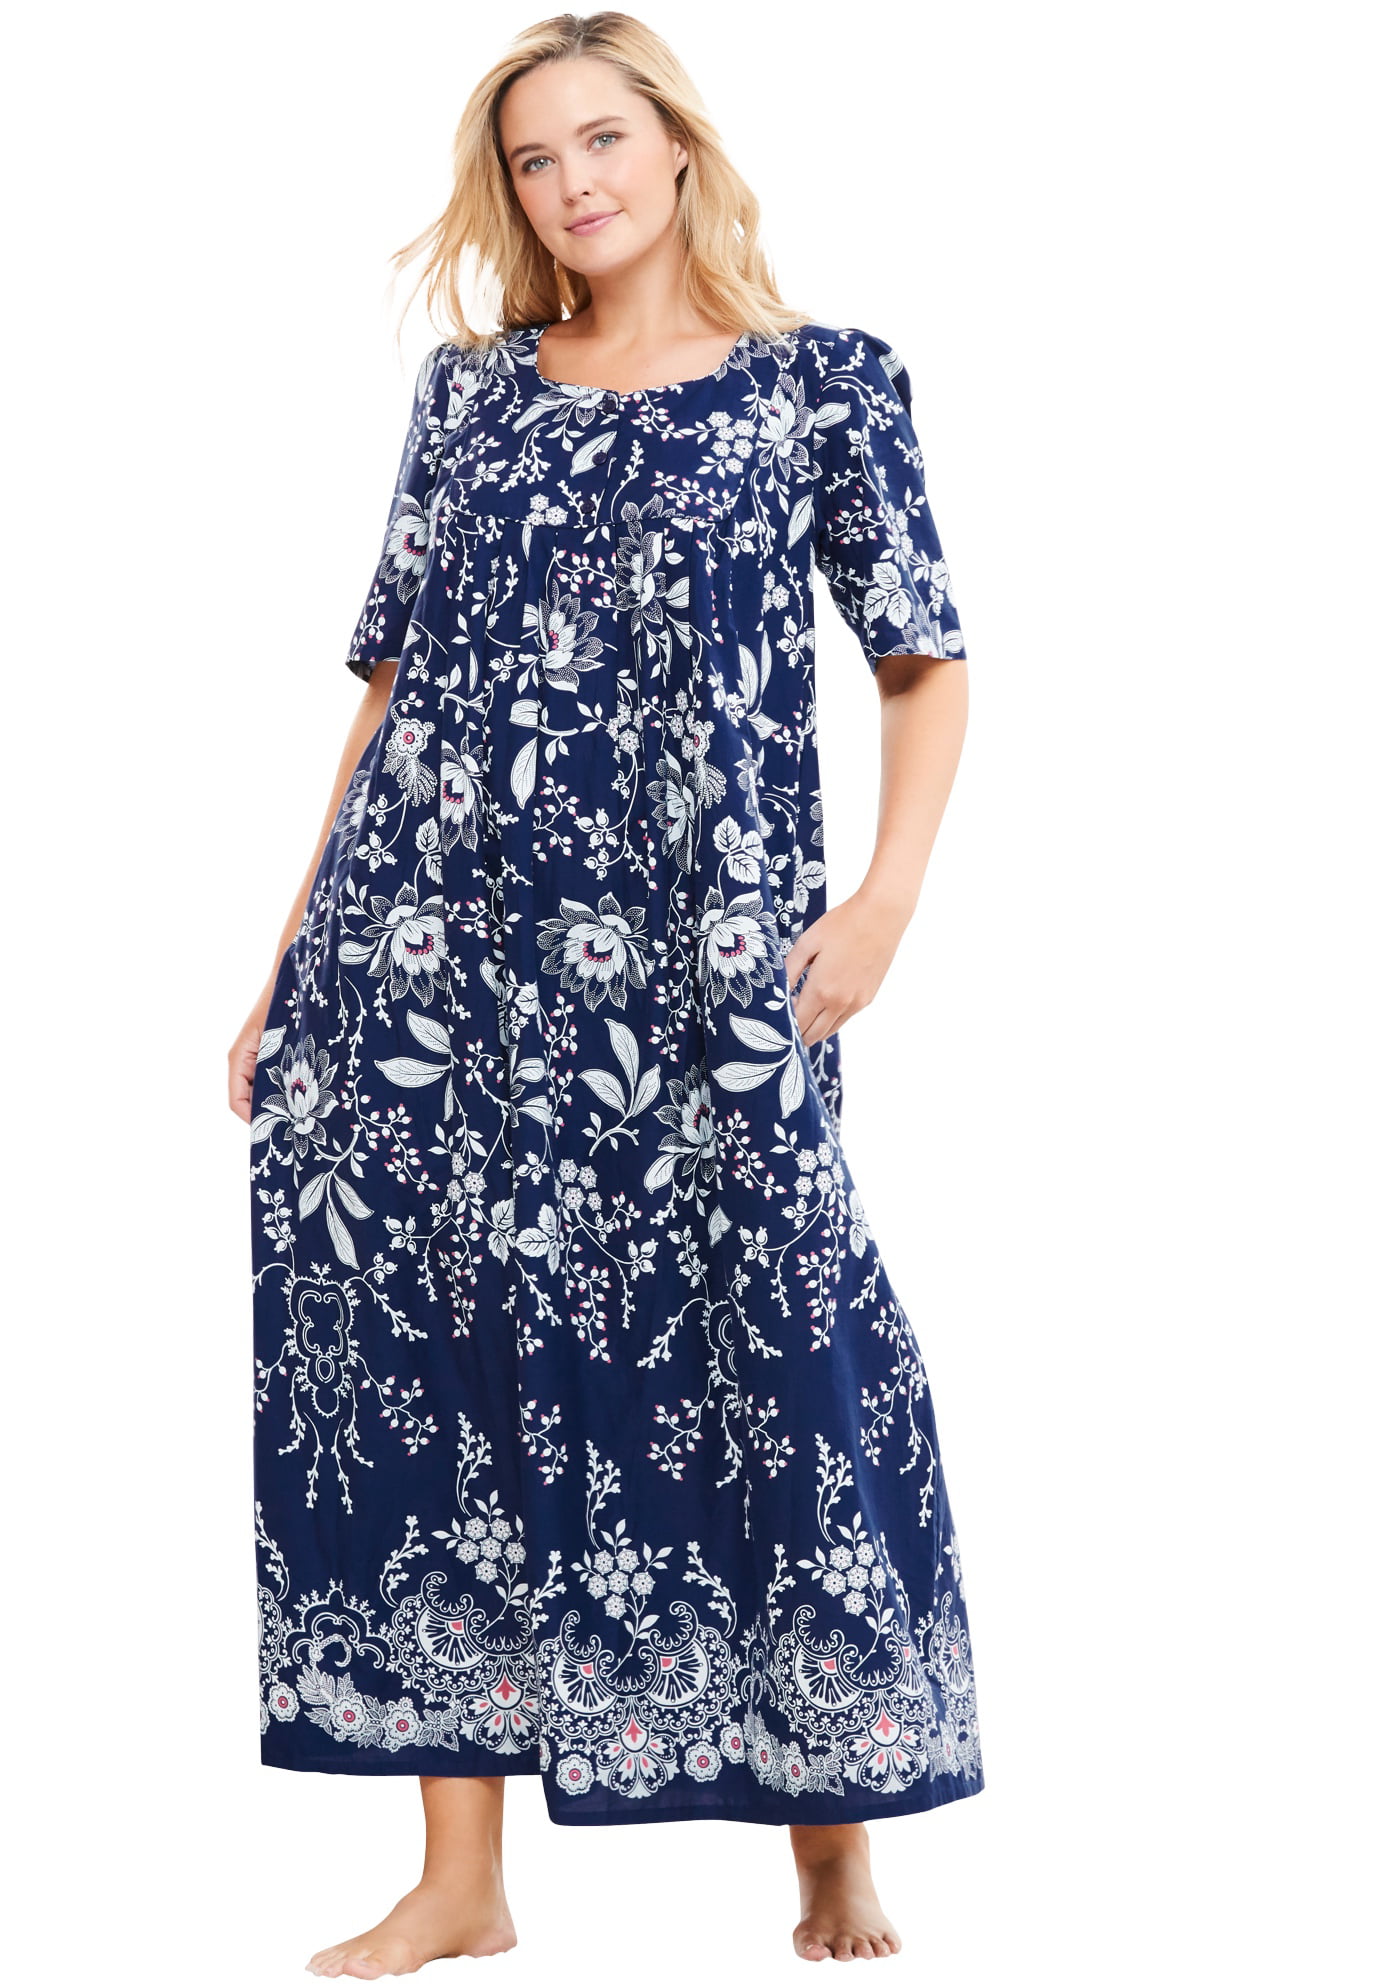 Only Necessities - Only Necessities Women's Plus Size Mixed Print Long ...